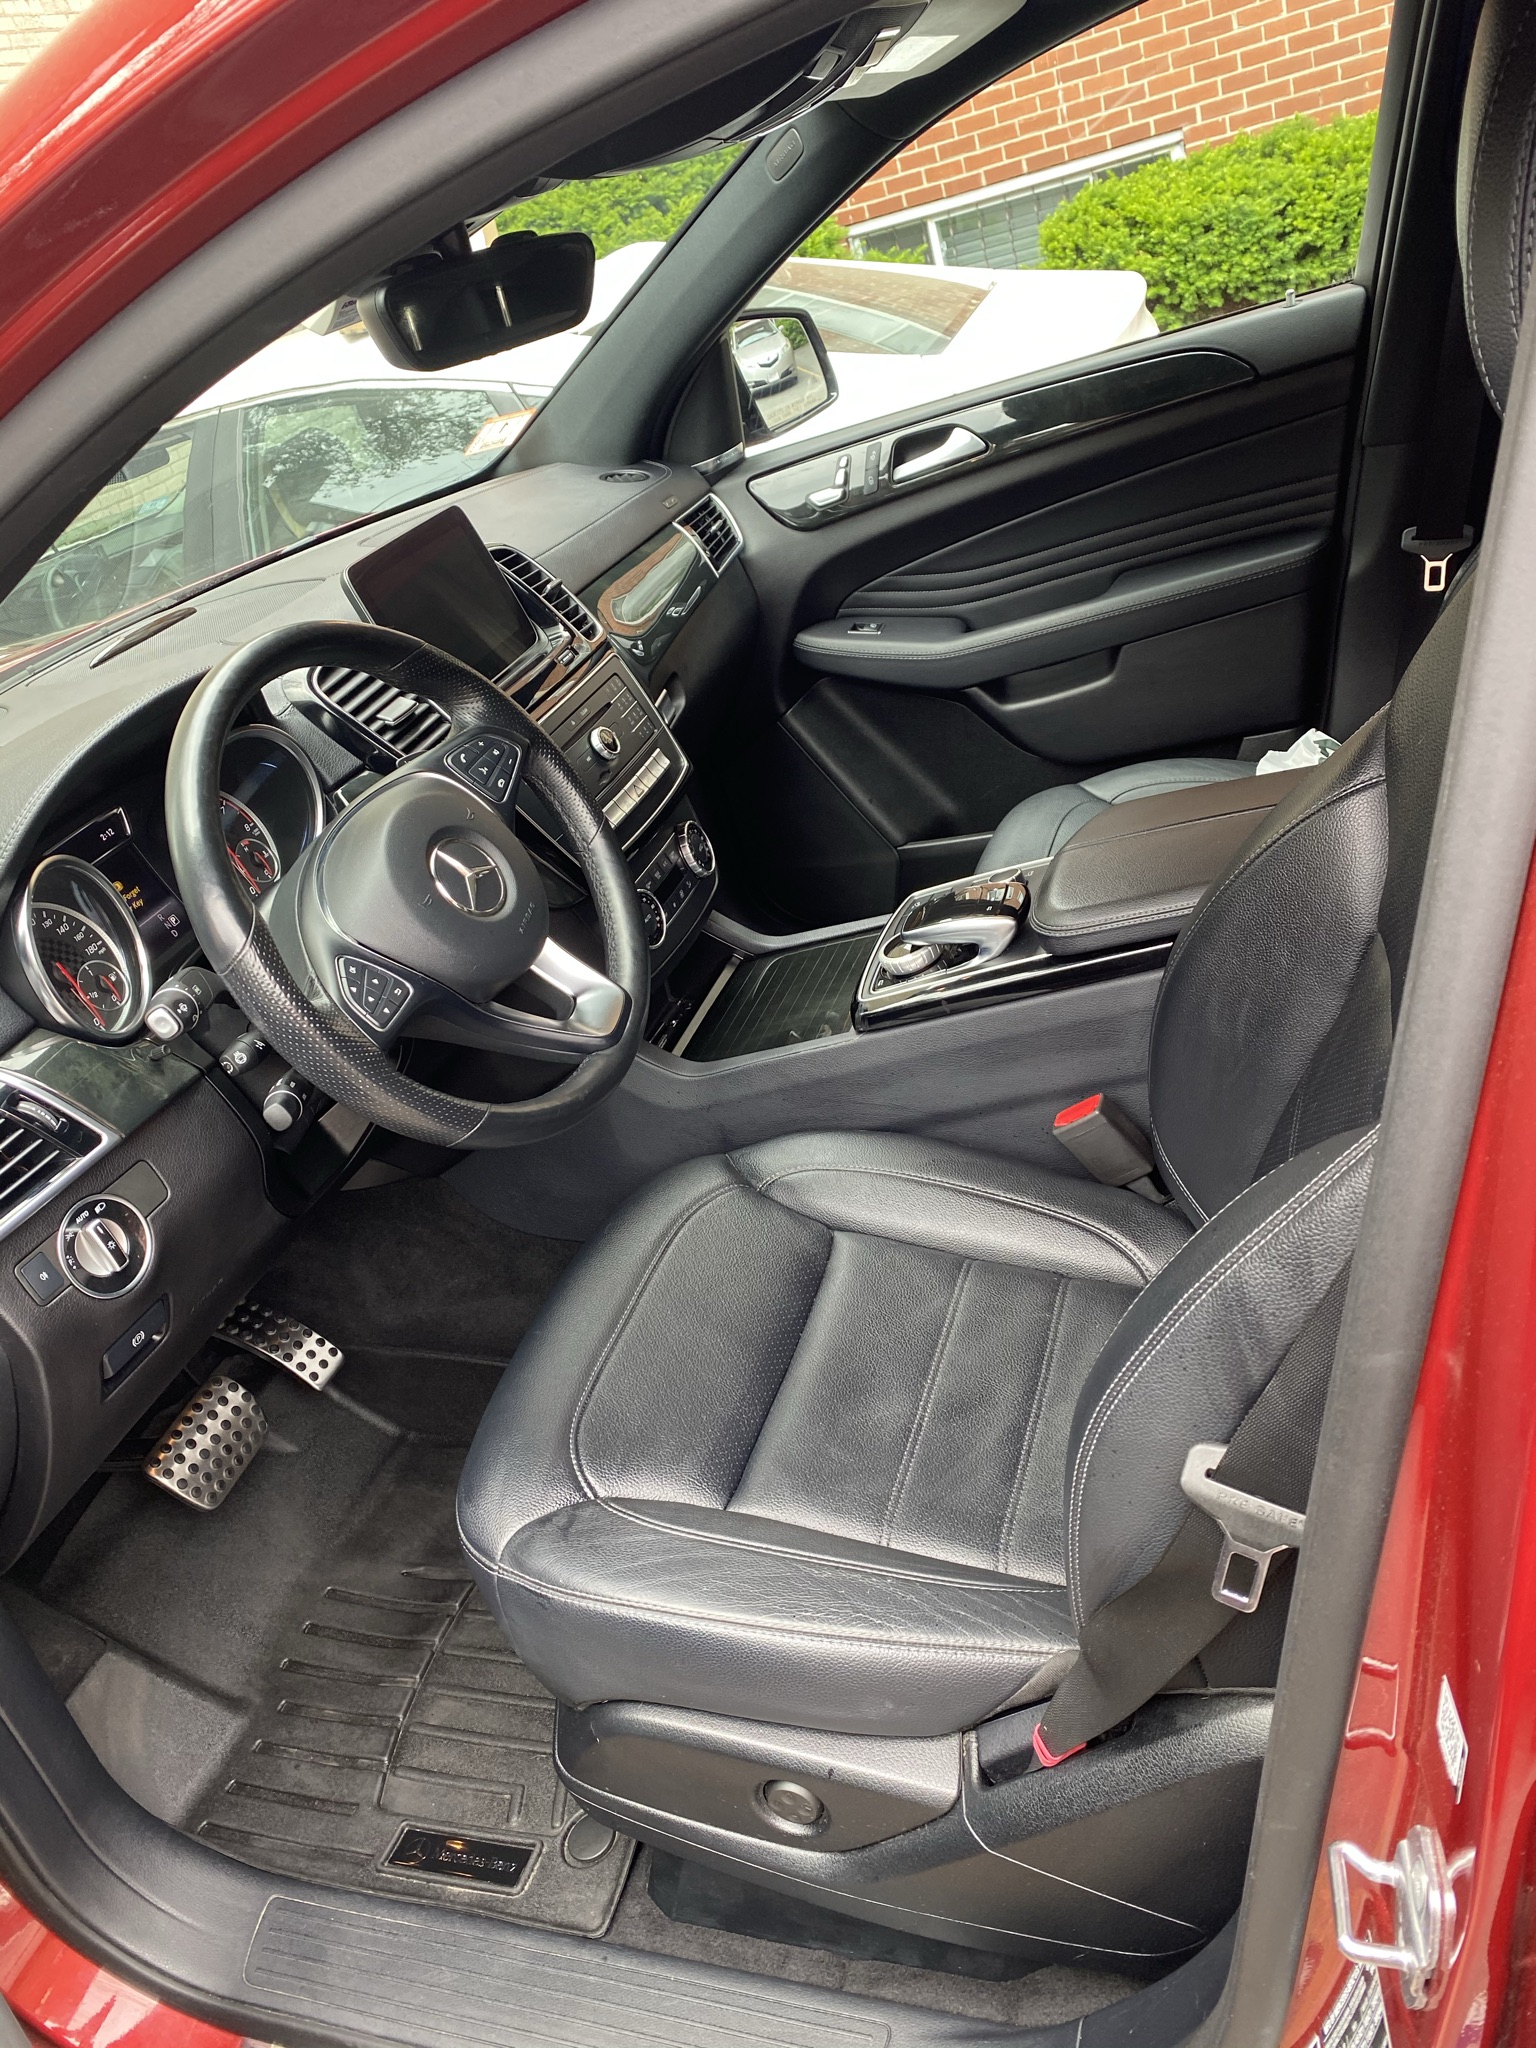 Mercedes GLE interior front row